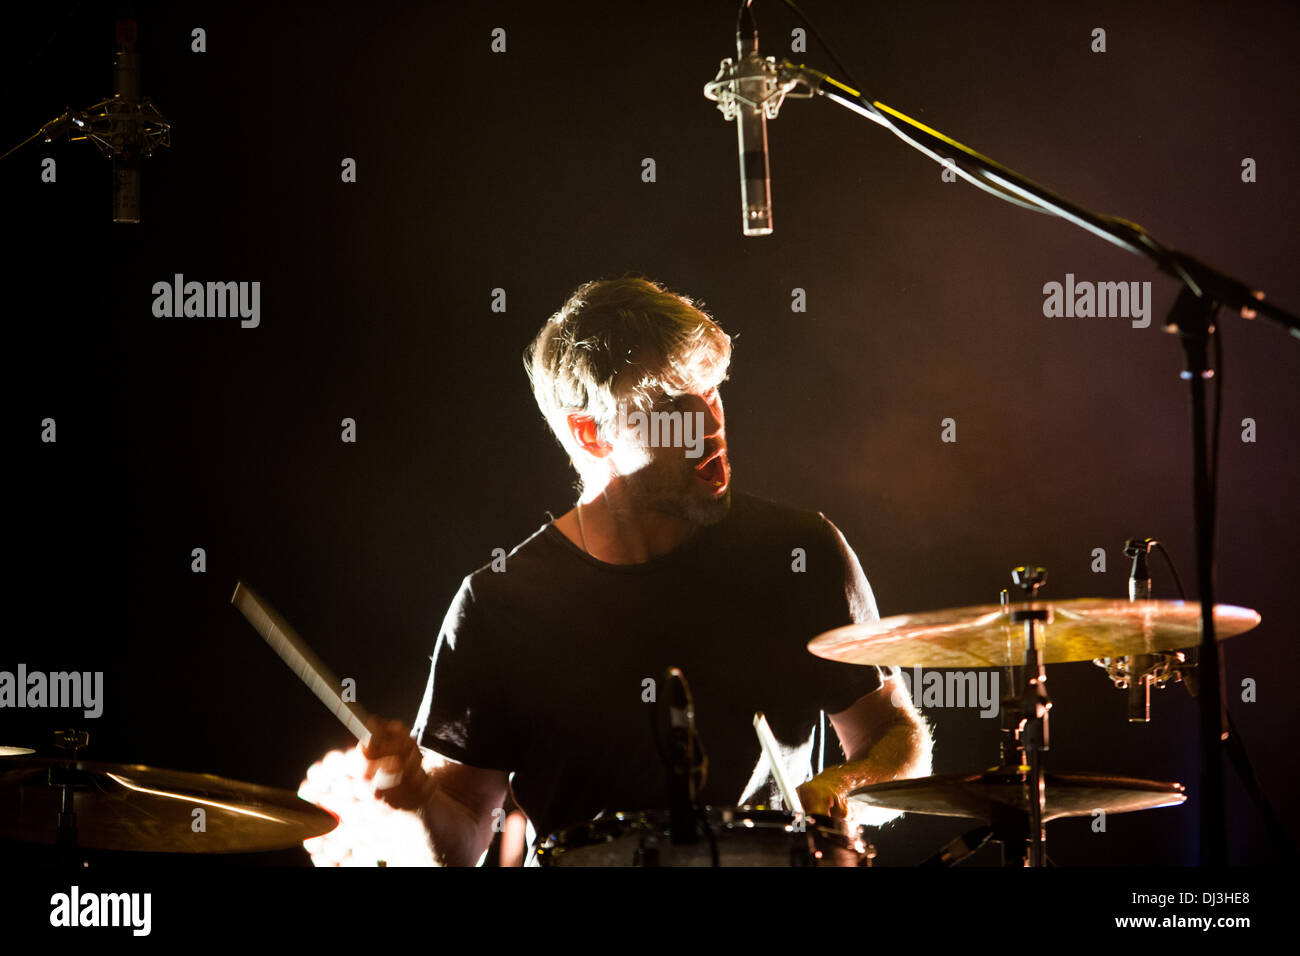 London, UK. 20th November 2013. Dominic Greensmith, Reef drummer performing at one-off KOKO show as part of their 20th Anniversary Tour. London, UK 20th November 2013. Credit:  martyn wheatley/Alamy Live News Stock Photo